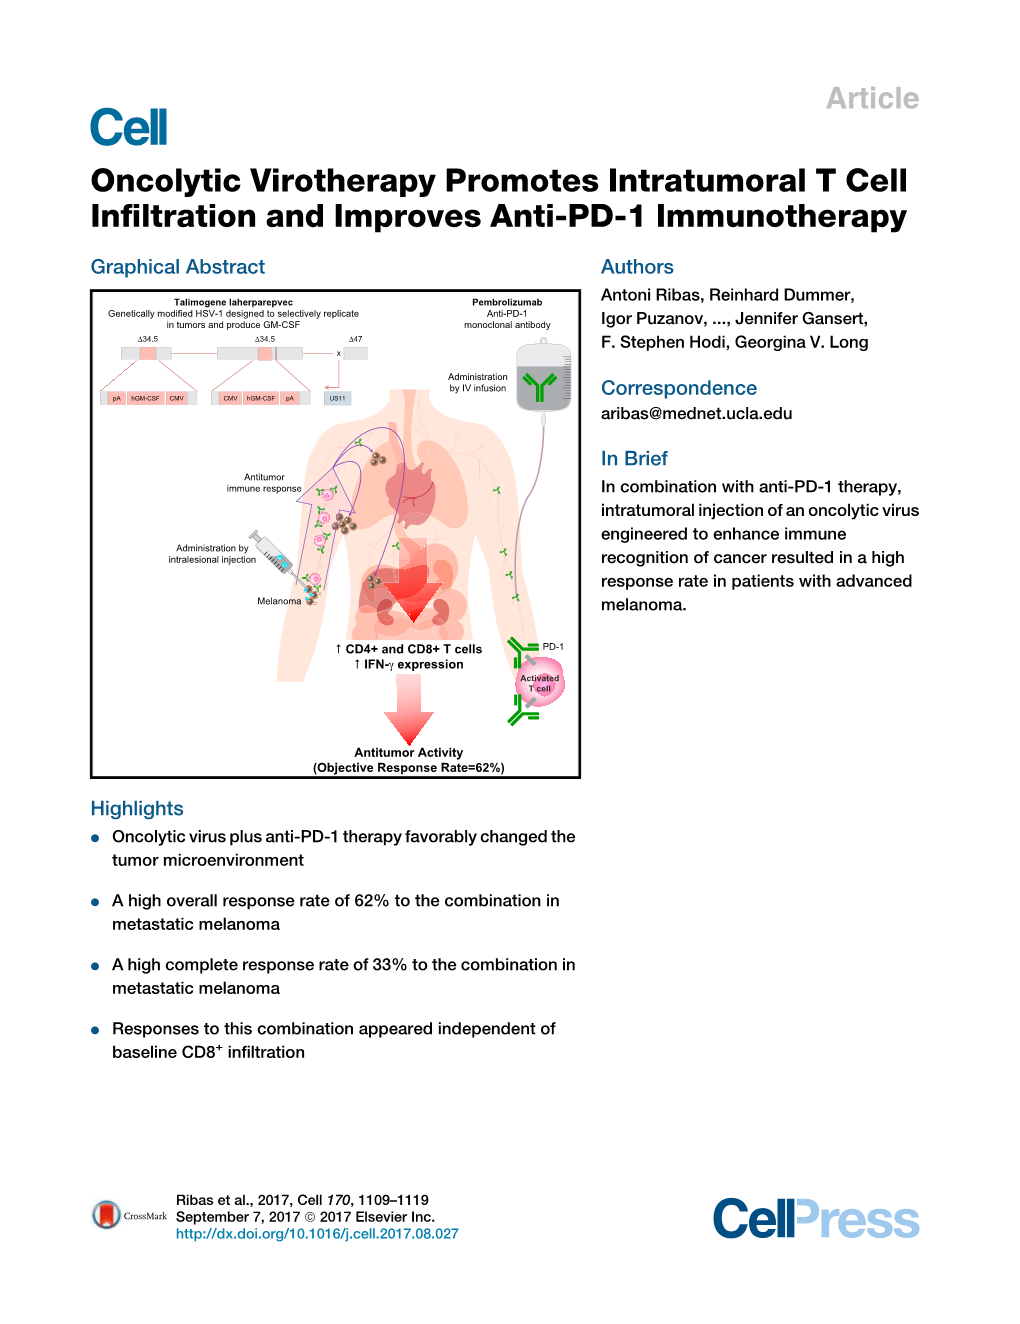 Oncolytic Virotherapy Promotes Intratumoral T Cell Infiltration And